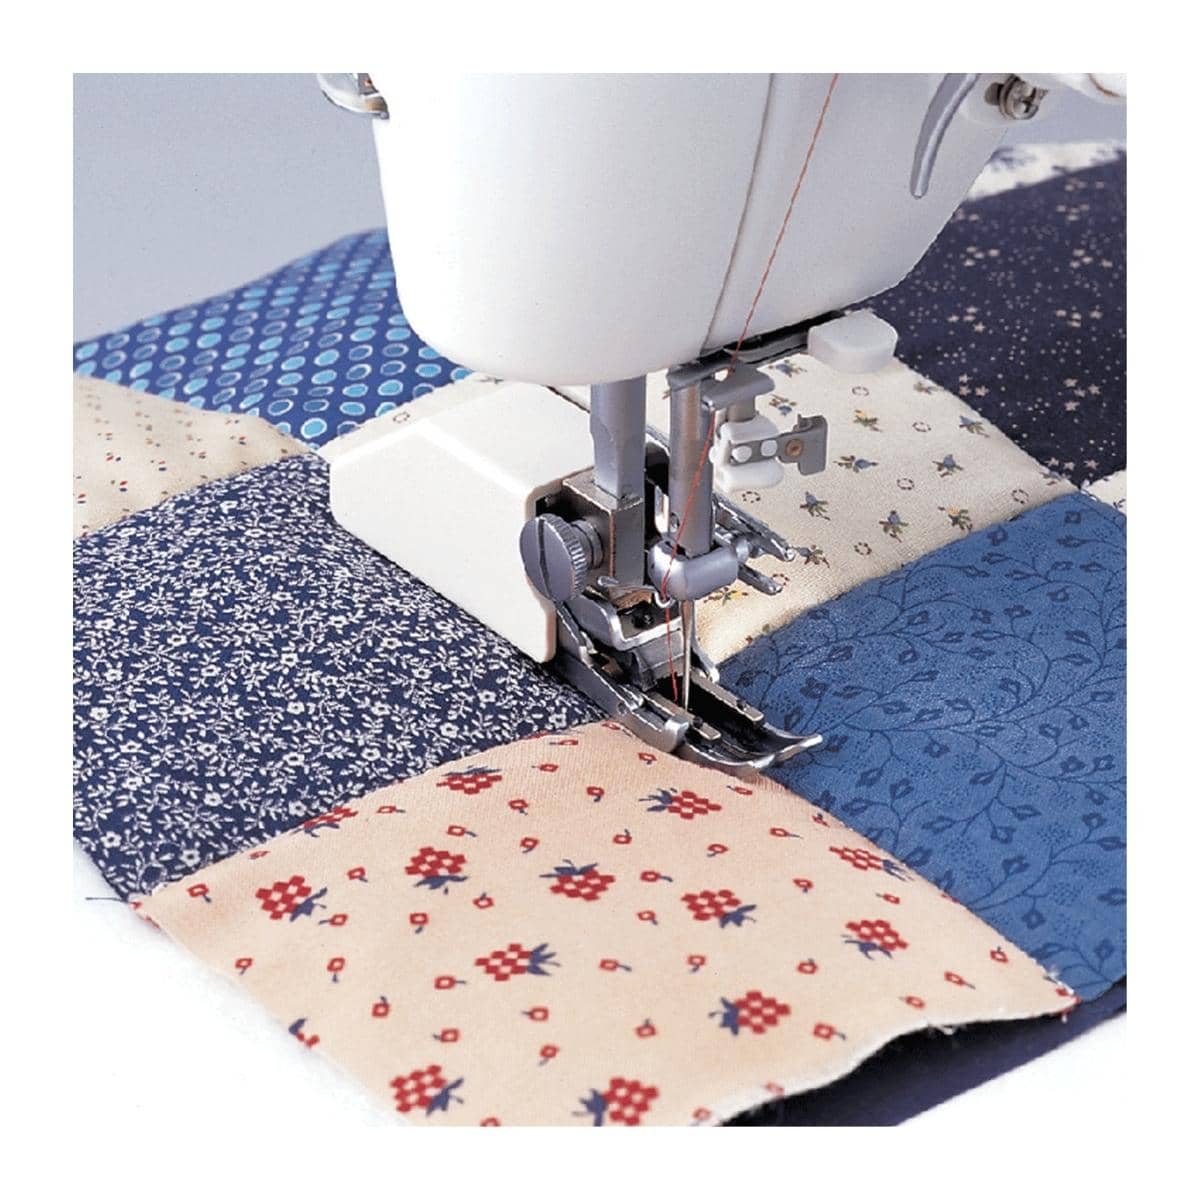 1/4 Quilting Foot (for Ruler) for Juki TL Machines